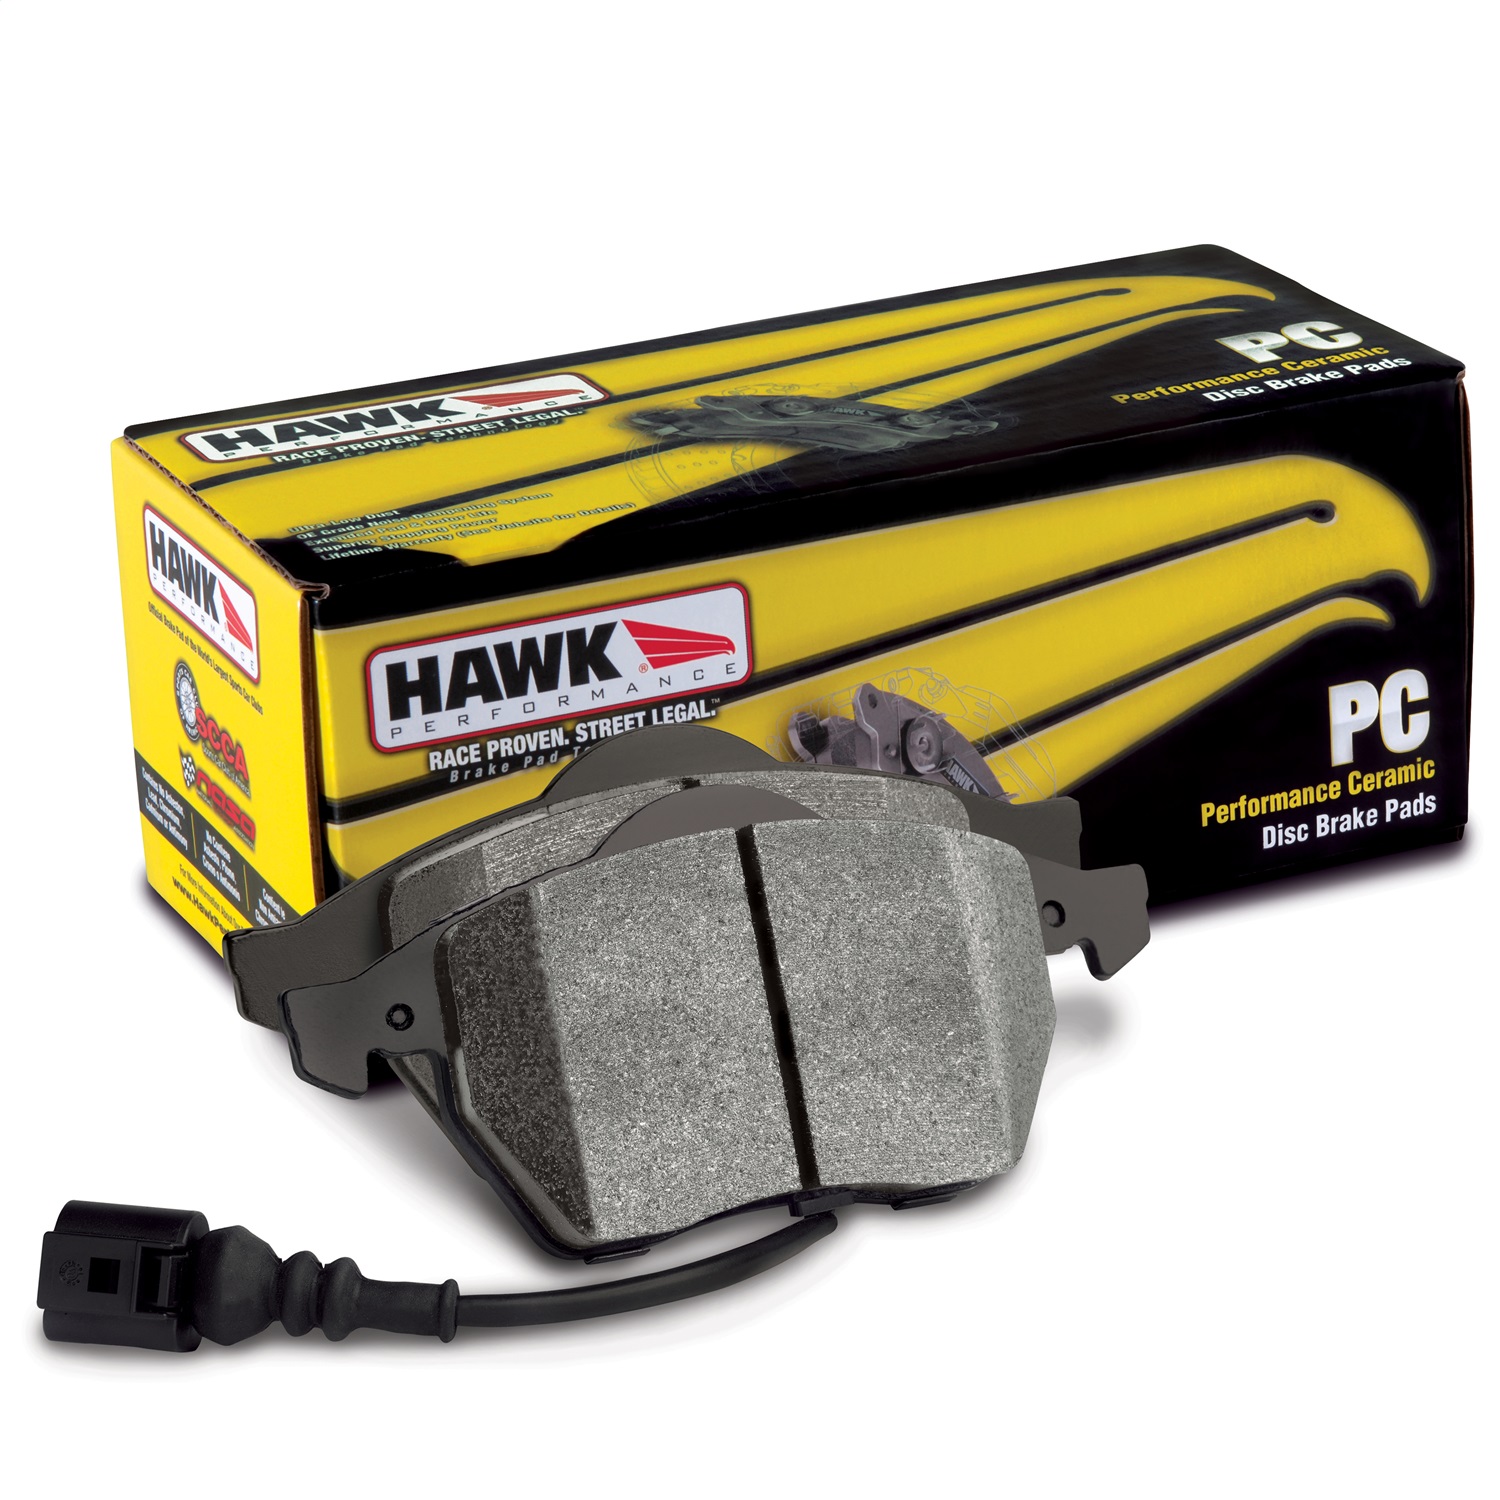 Picture of Hawk PC